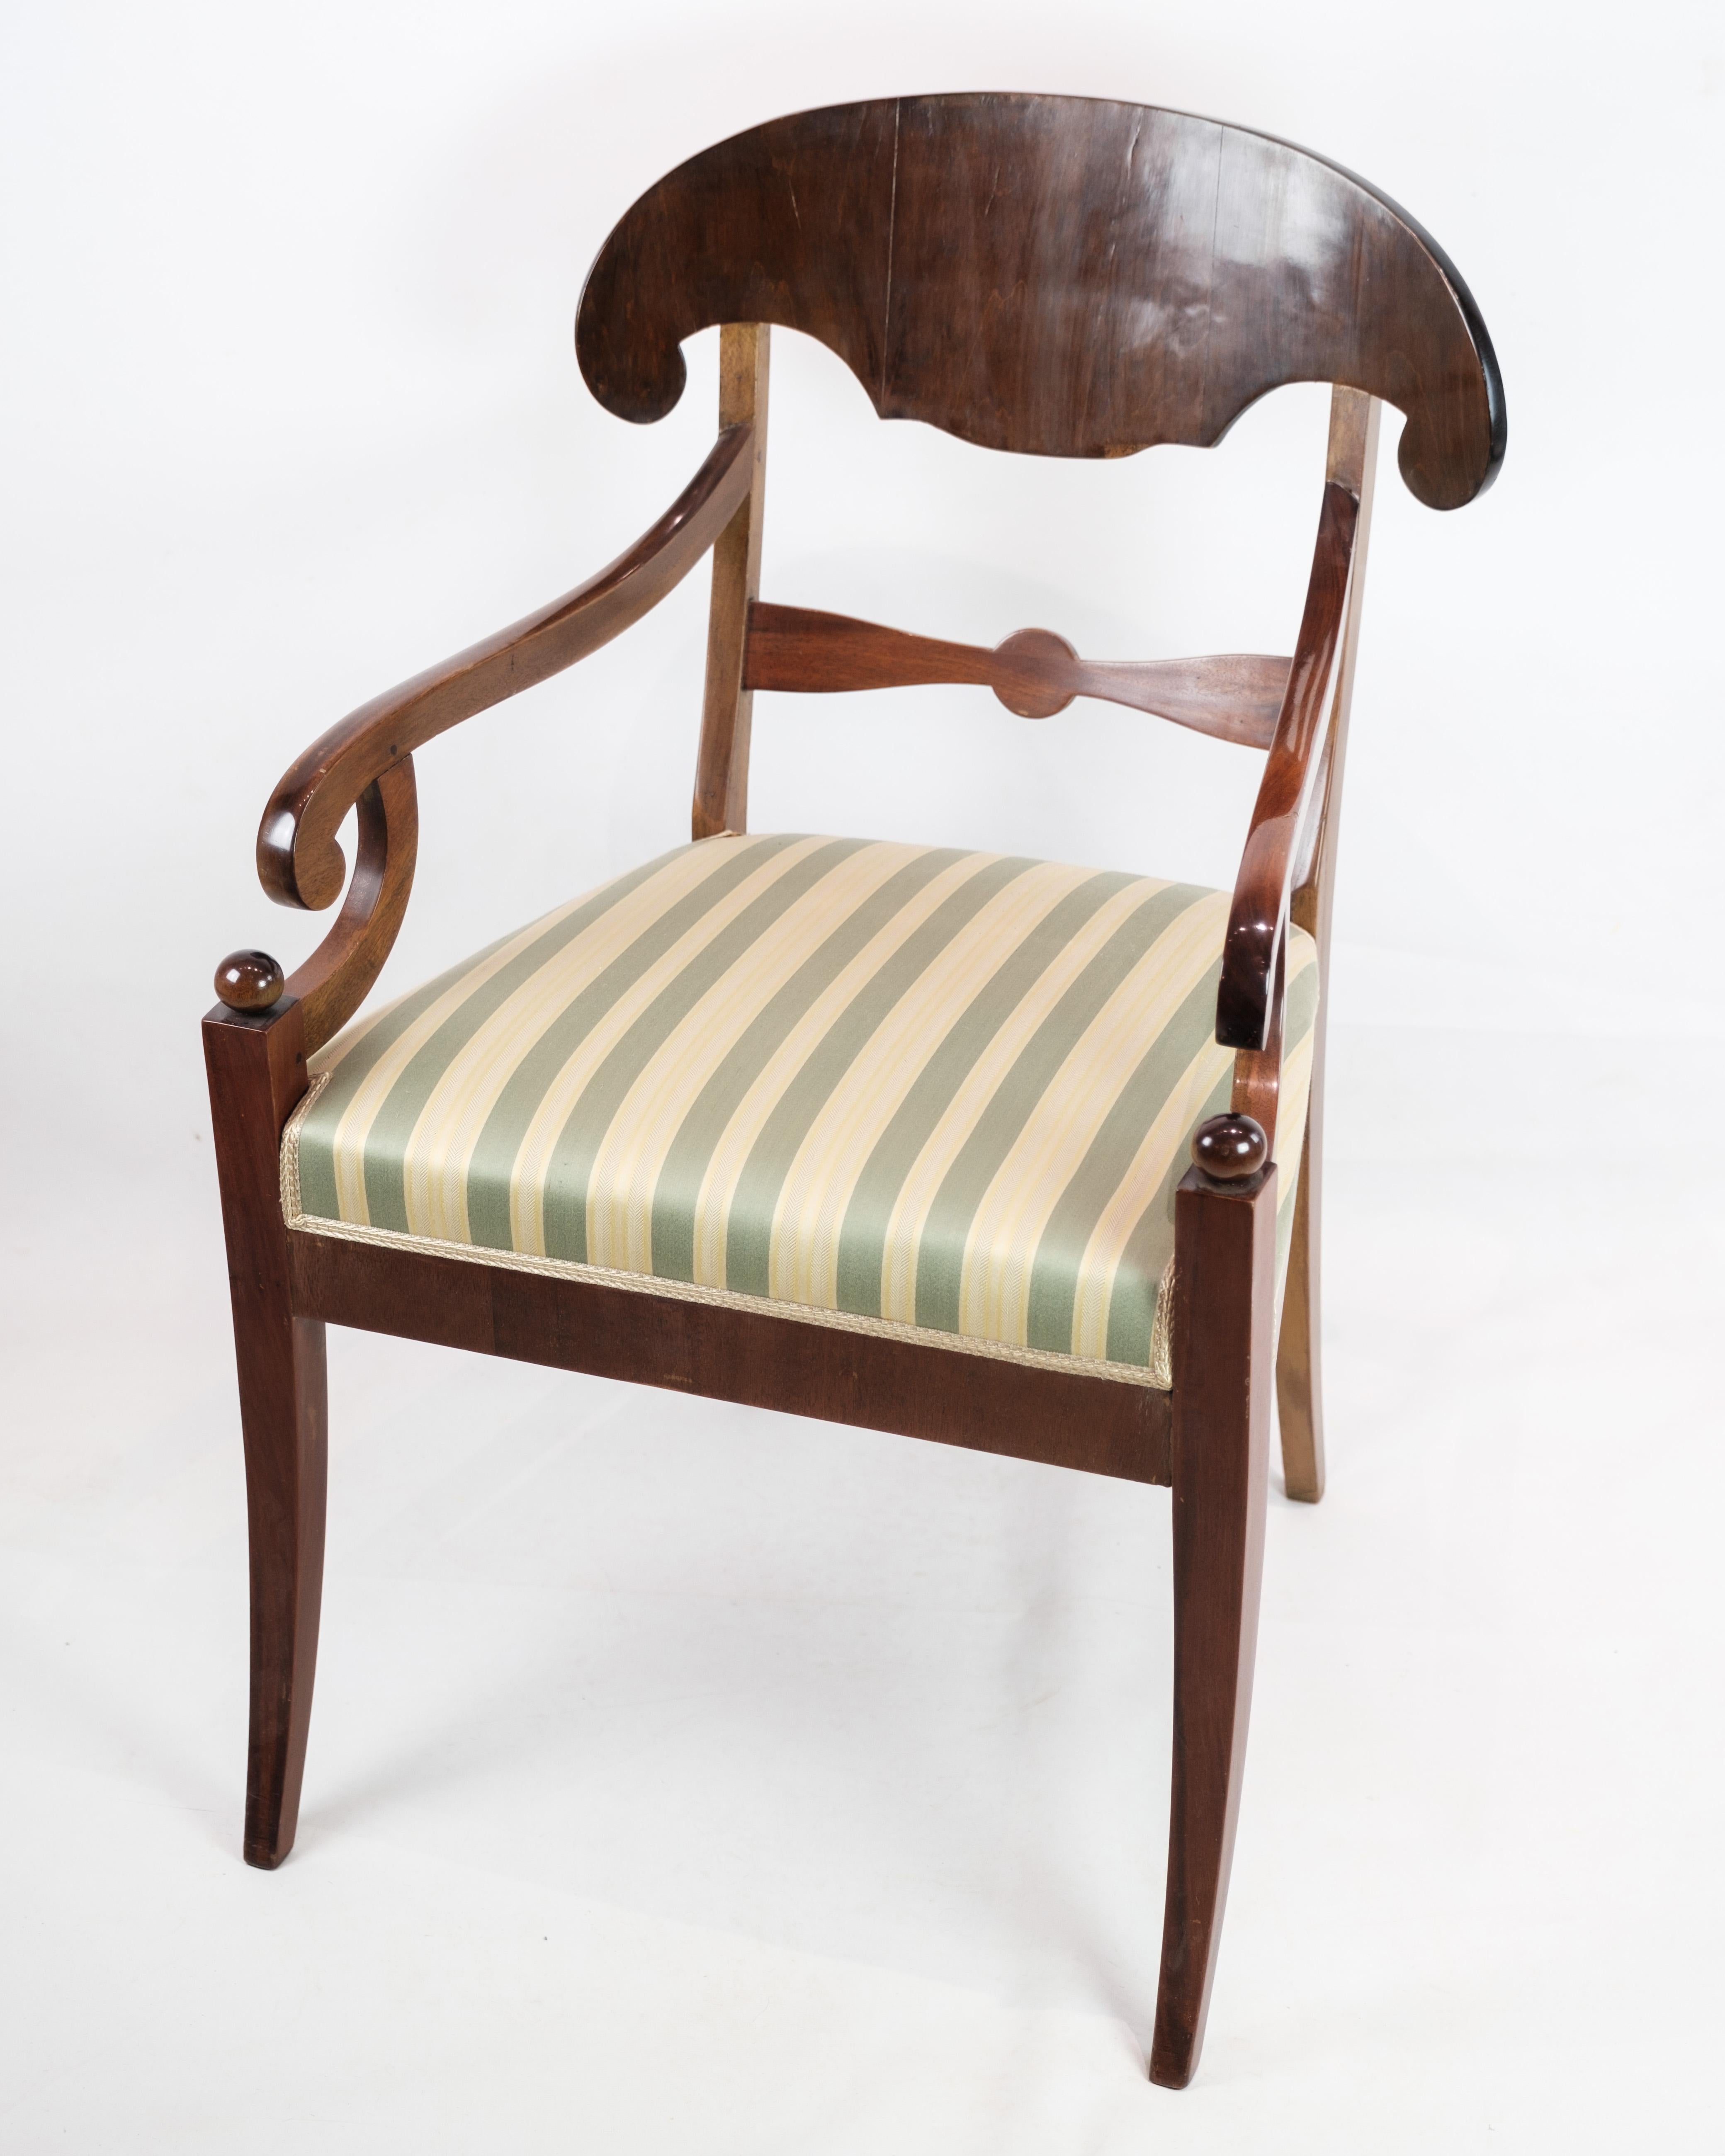 This late empire armchair from around 1840 exudes timeless elegance with its mahogany frame and light striped fabric upholstery. Crafted during the height of the empire period, it showcases exquisite craftsmanship and classic design elements.

The